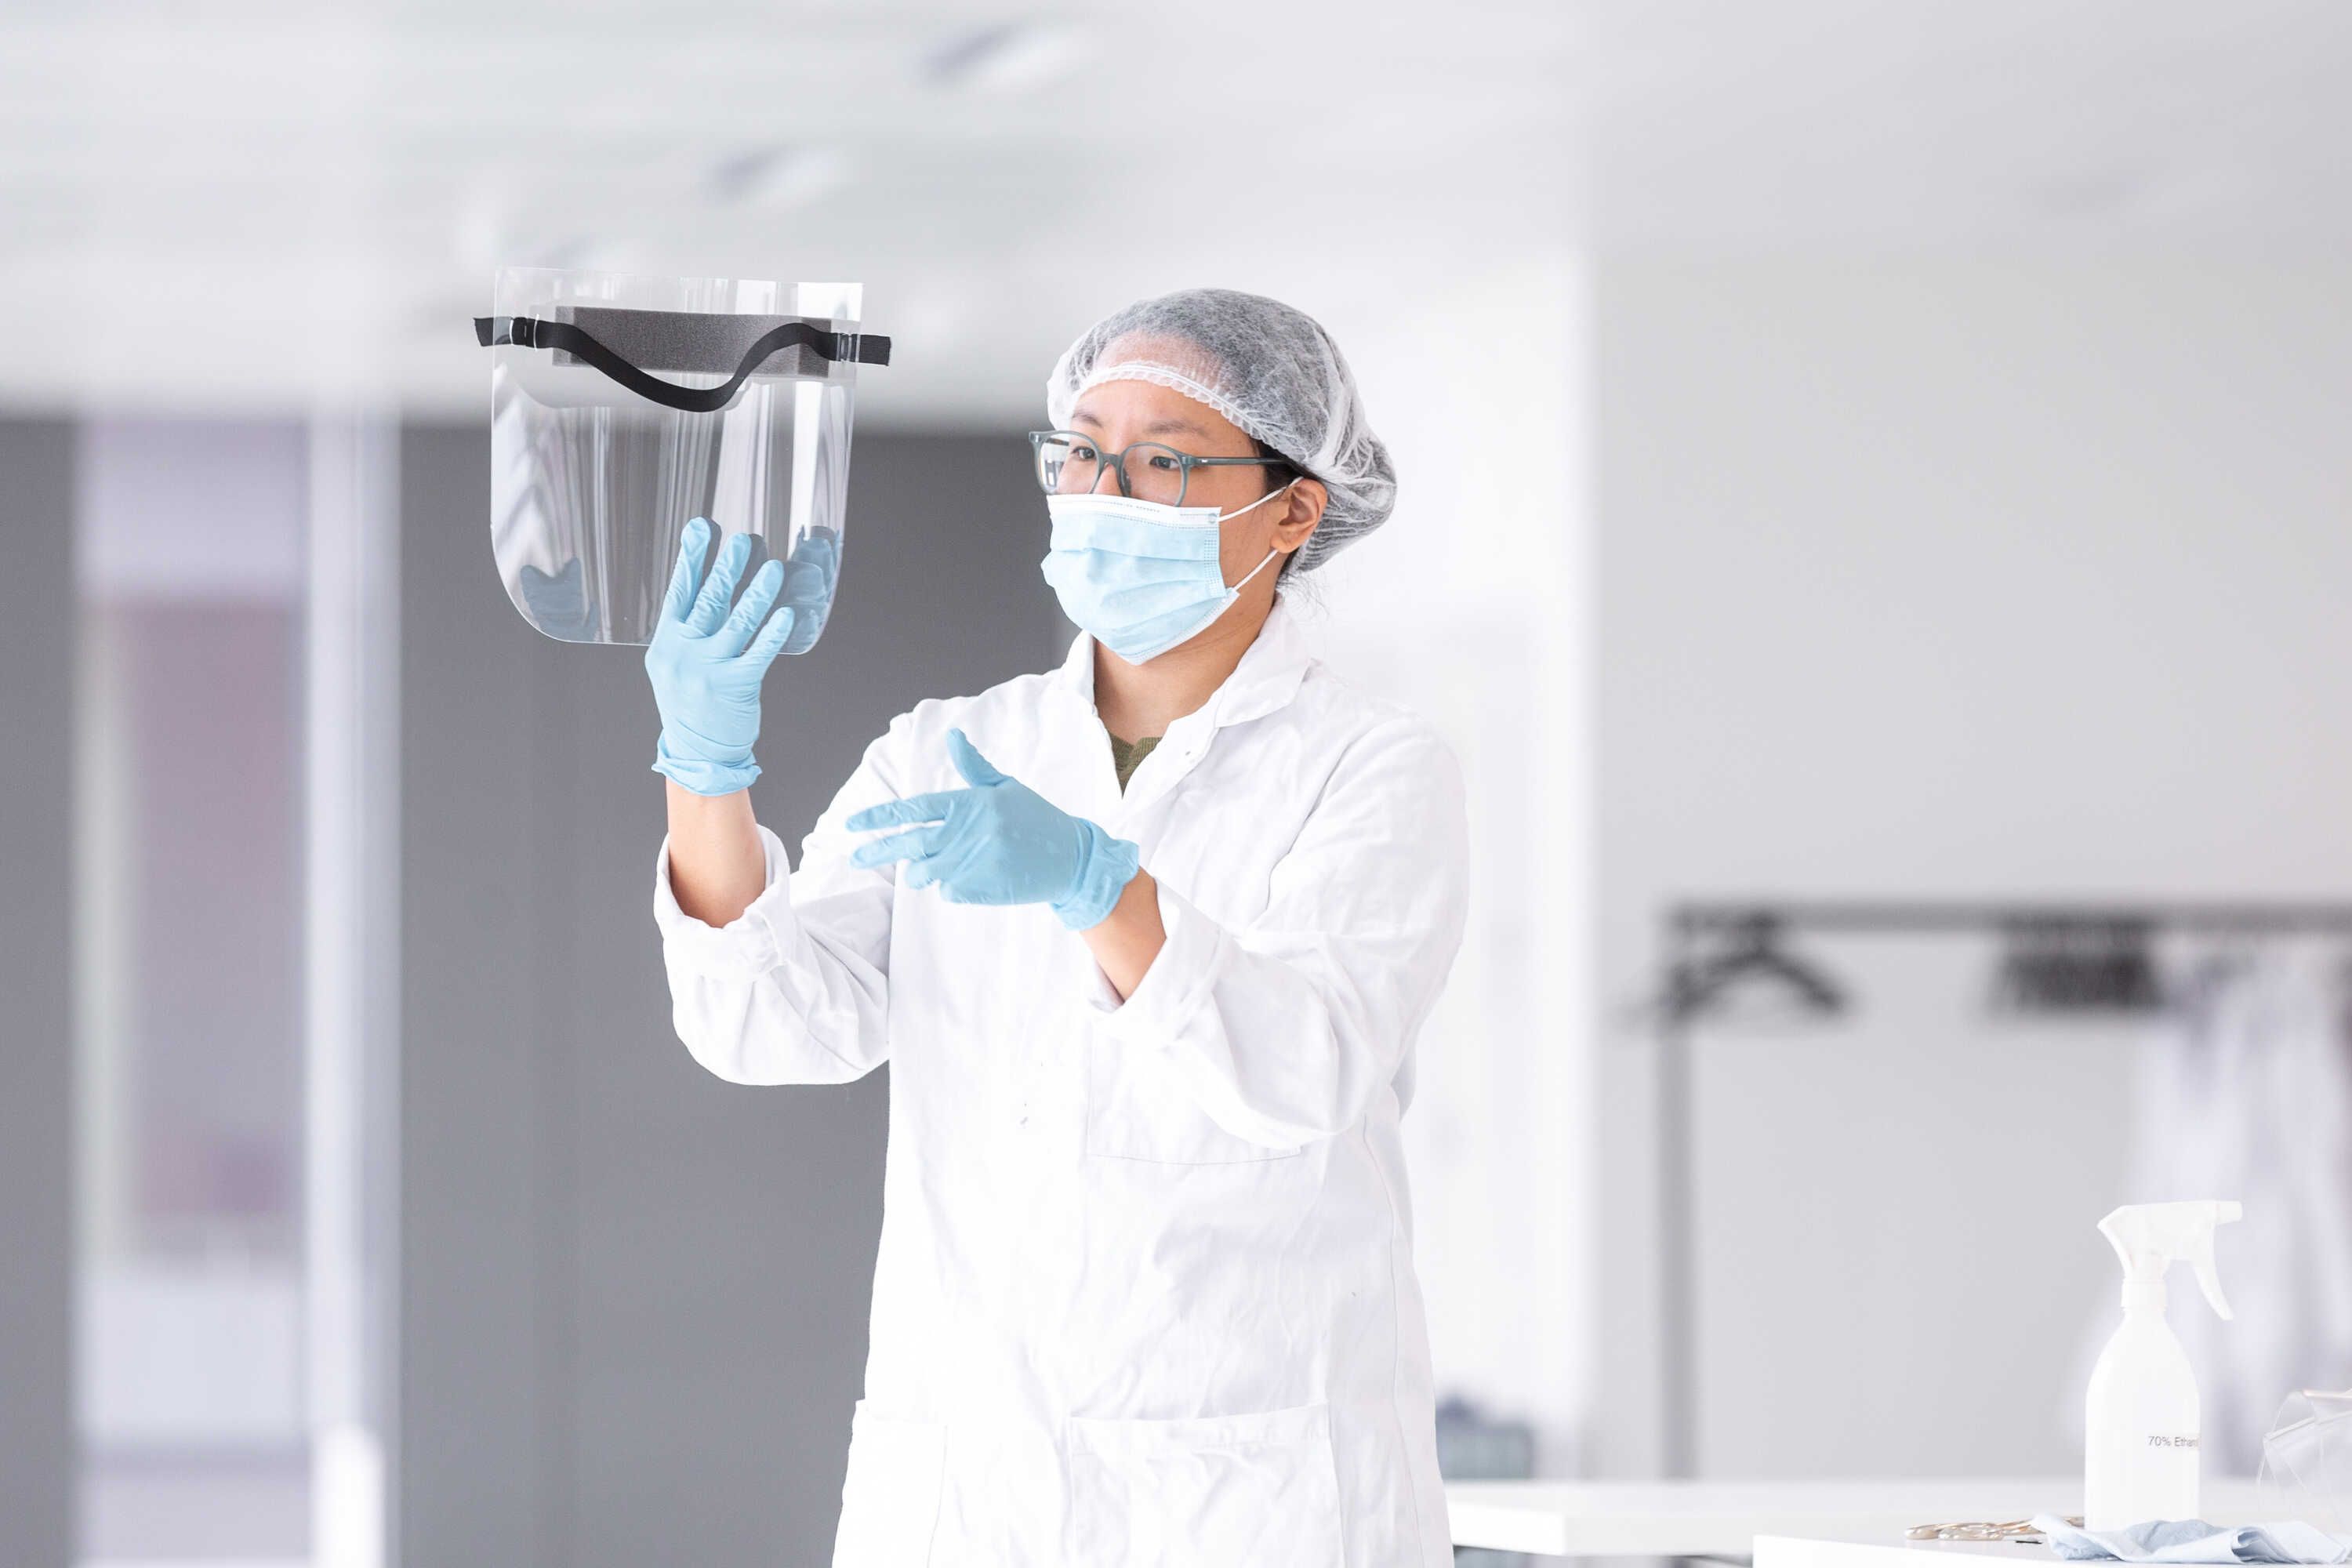 A woman in a lab coat and wearing PPE holds up a visor made to protect against COVID-19